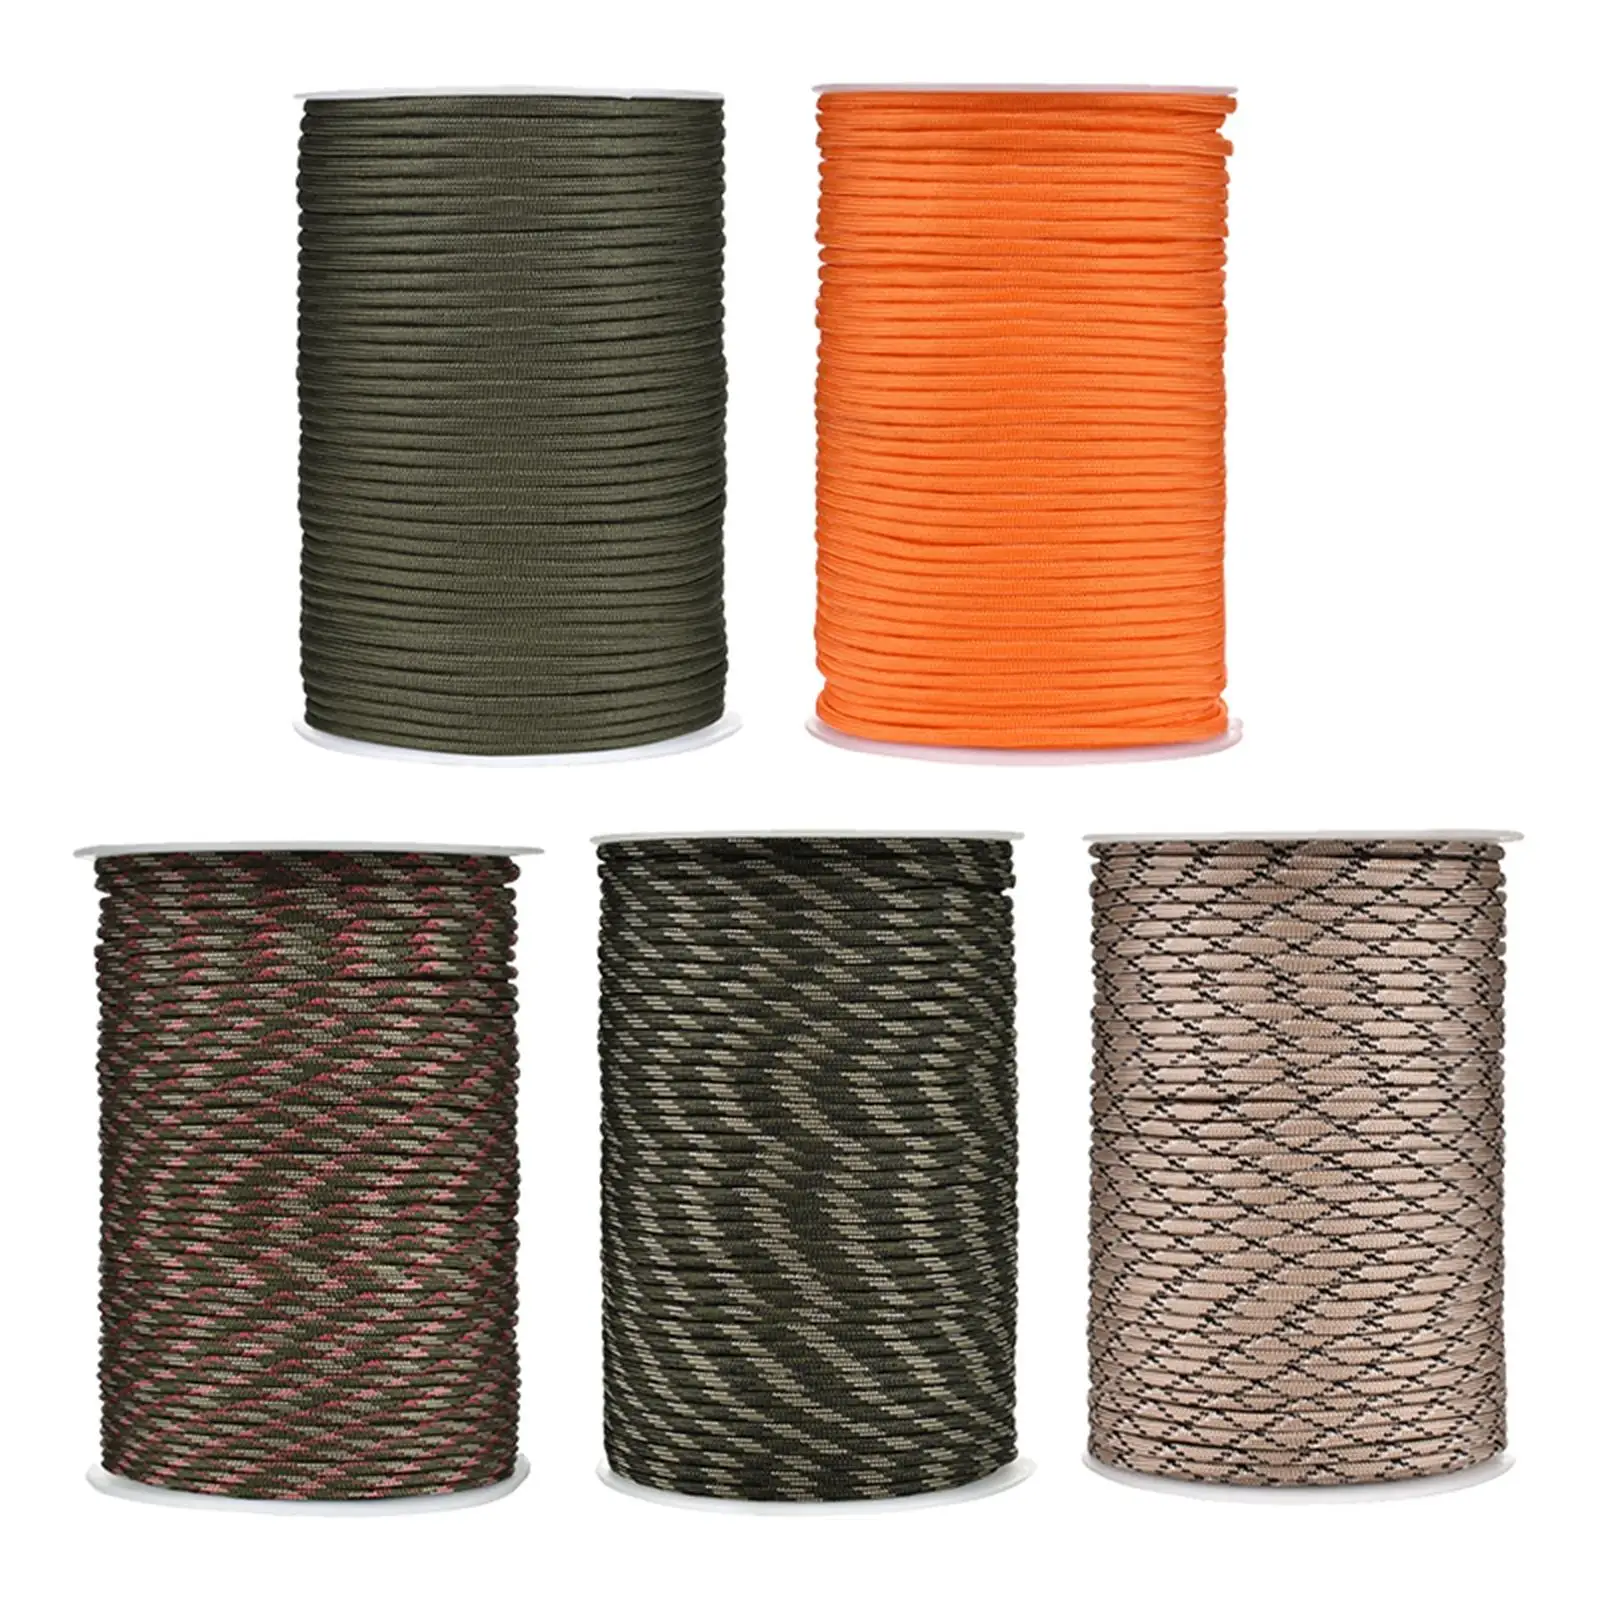 100M Paracord 550 Parachute Cord Outdoor Rope Spool Packaging Awning Gazebo